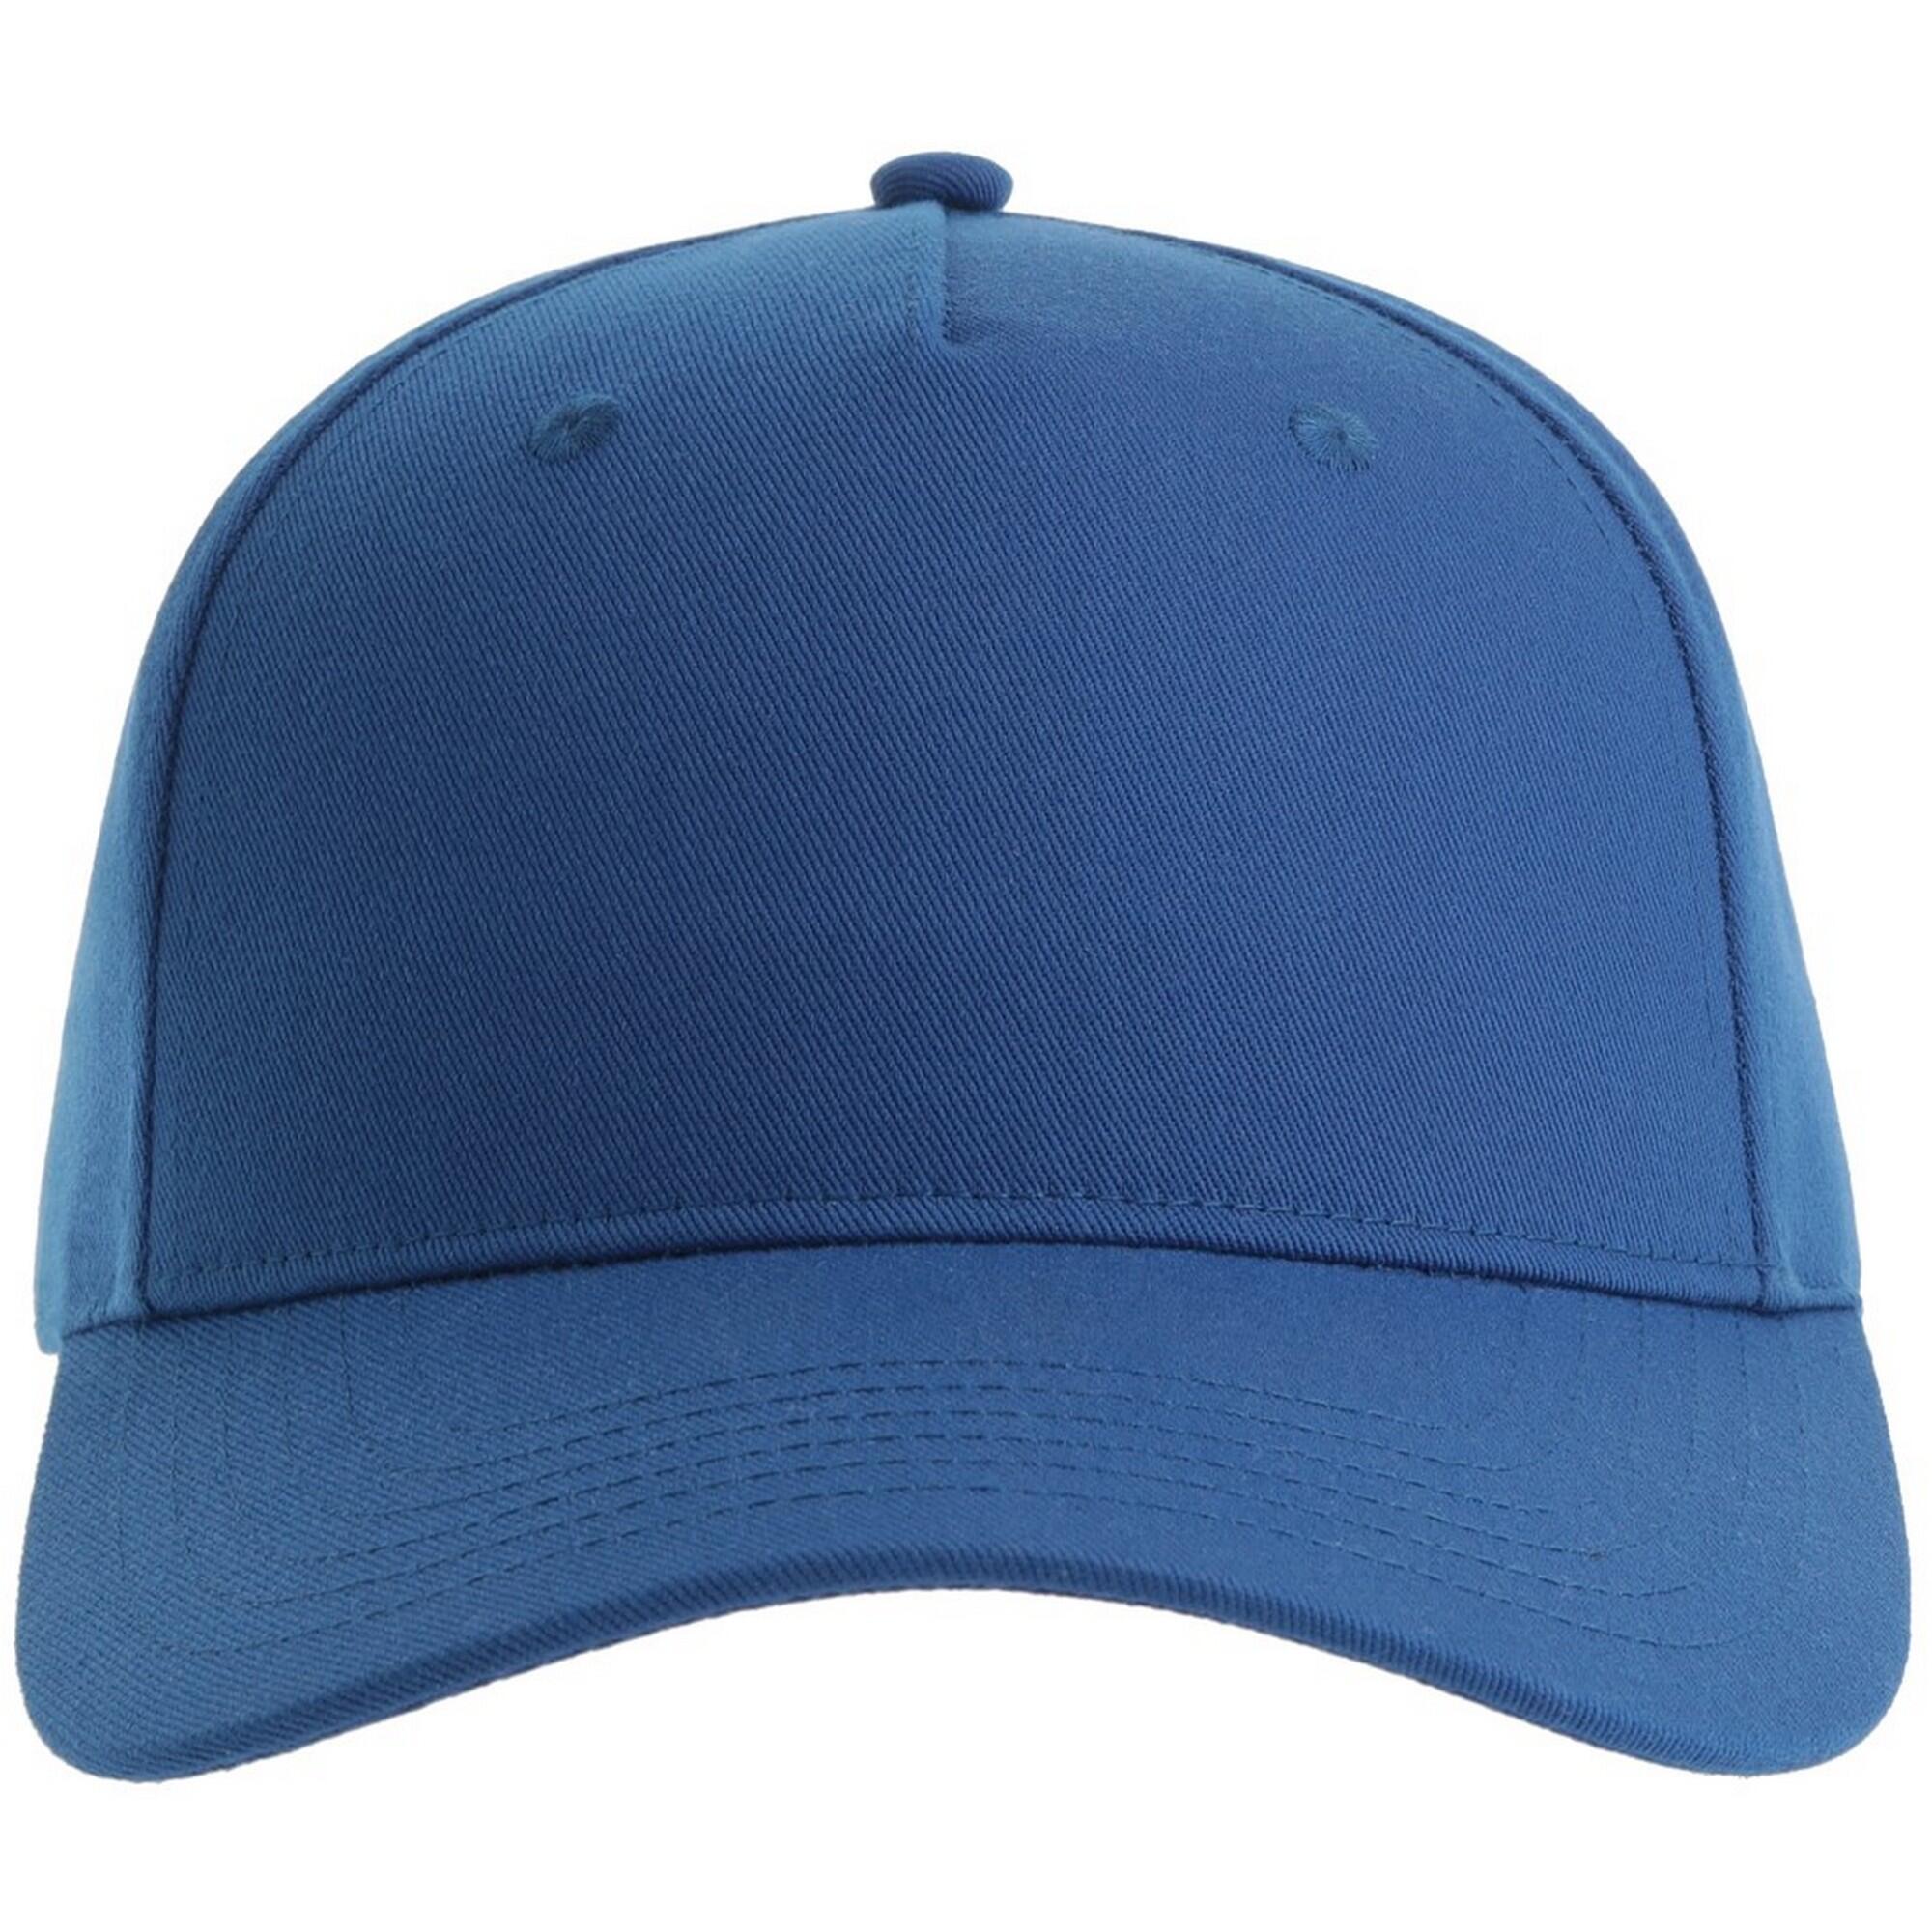 Unisex Adult Fiji Recycled Polyester Cap (Royal Blue) 2/3